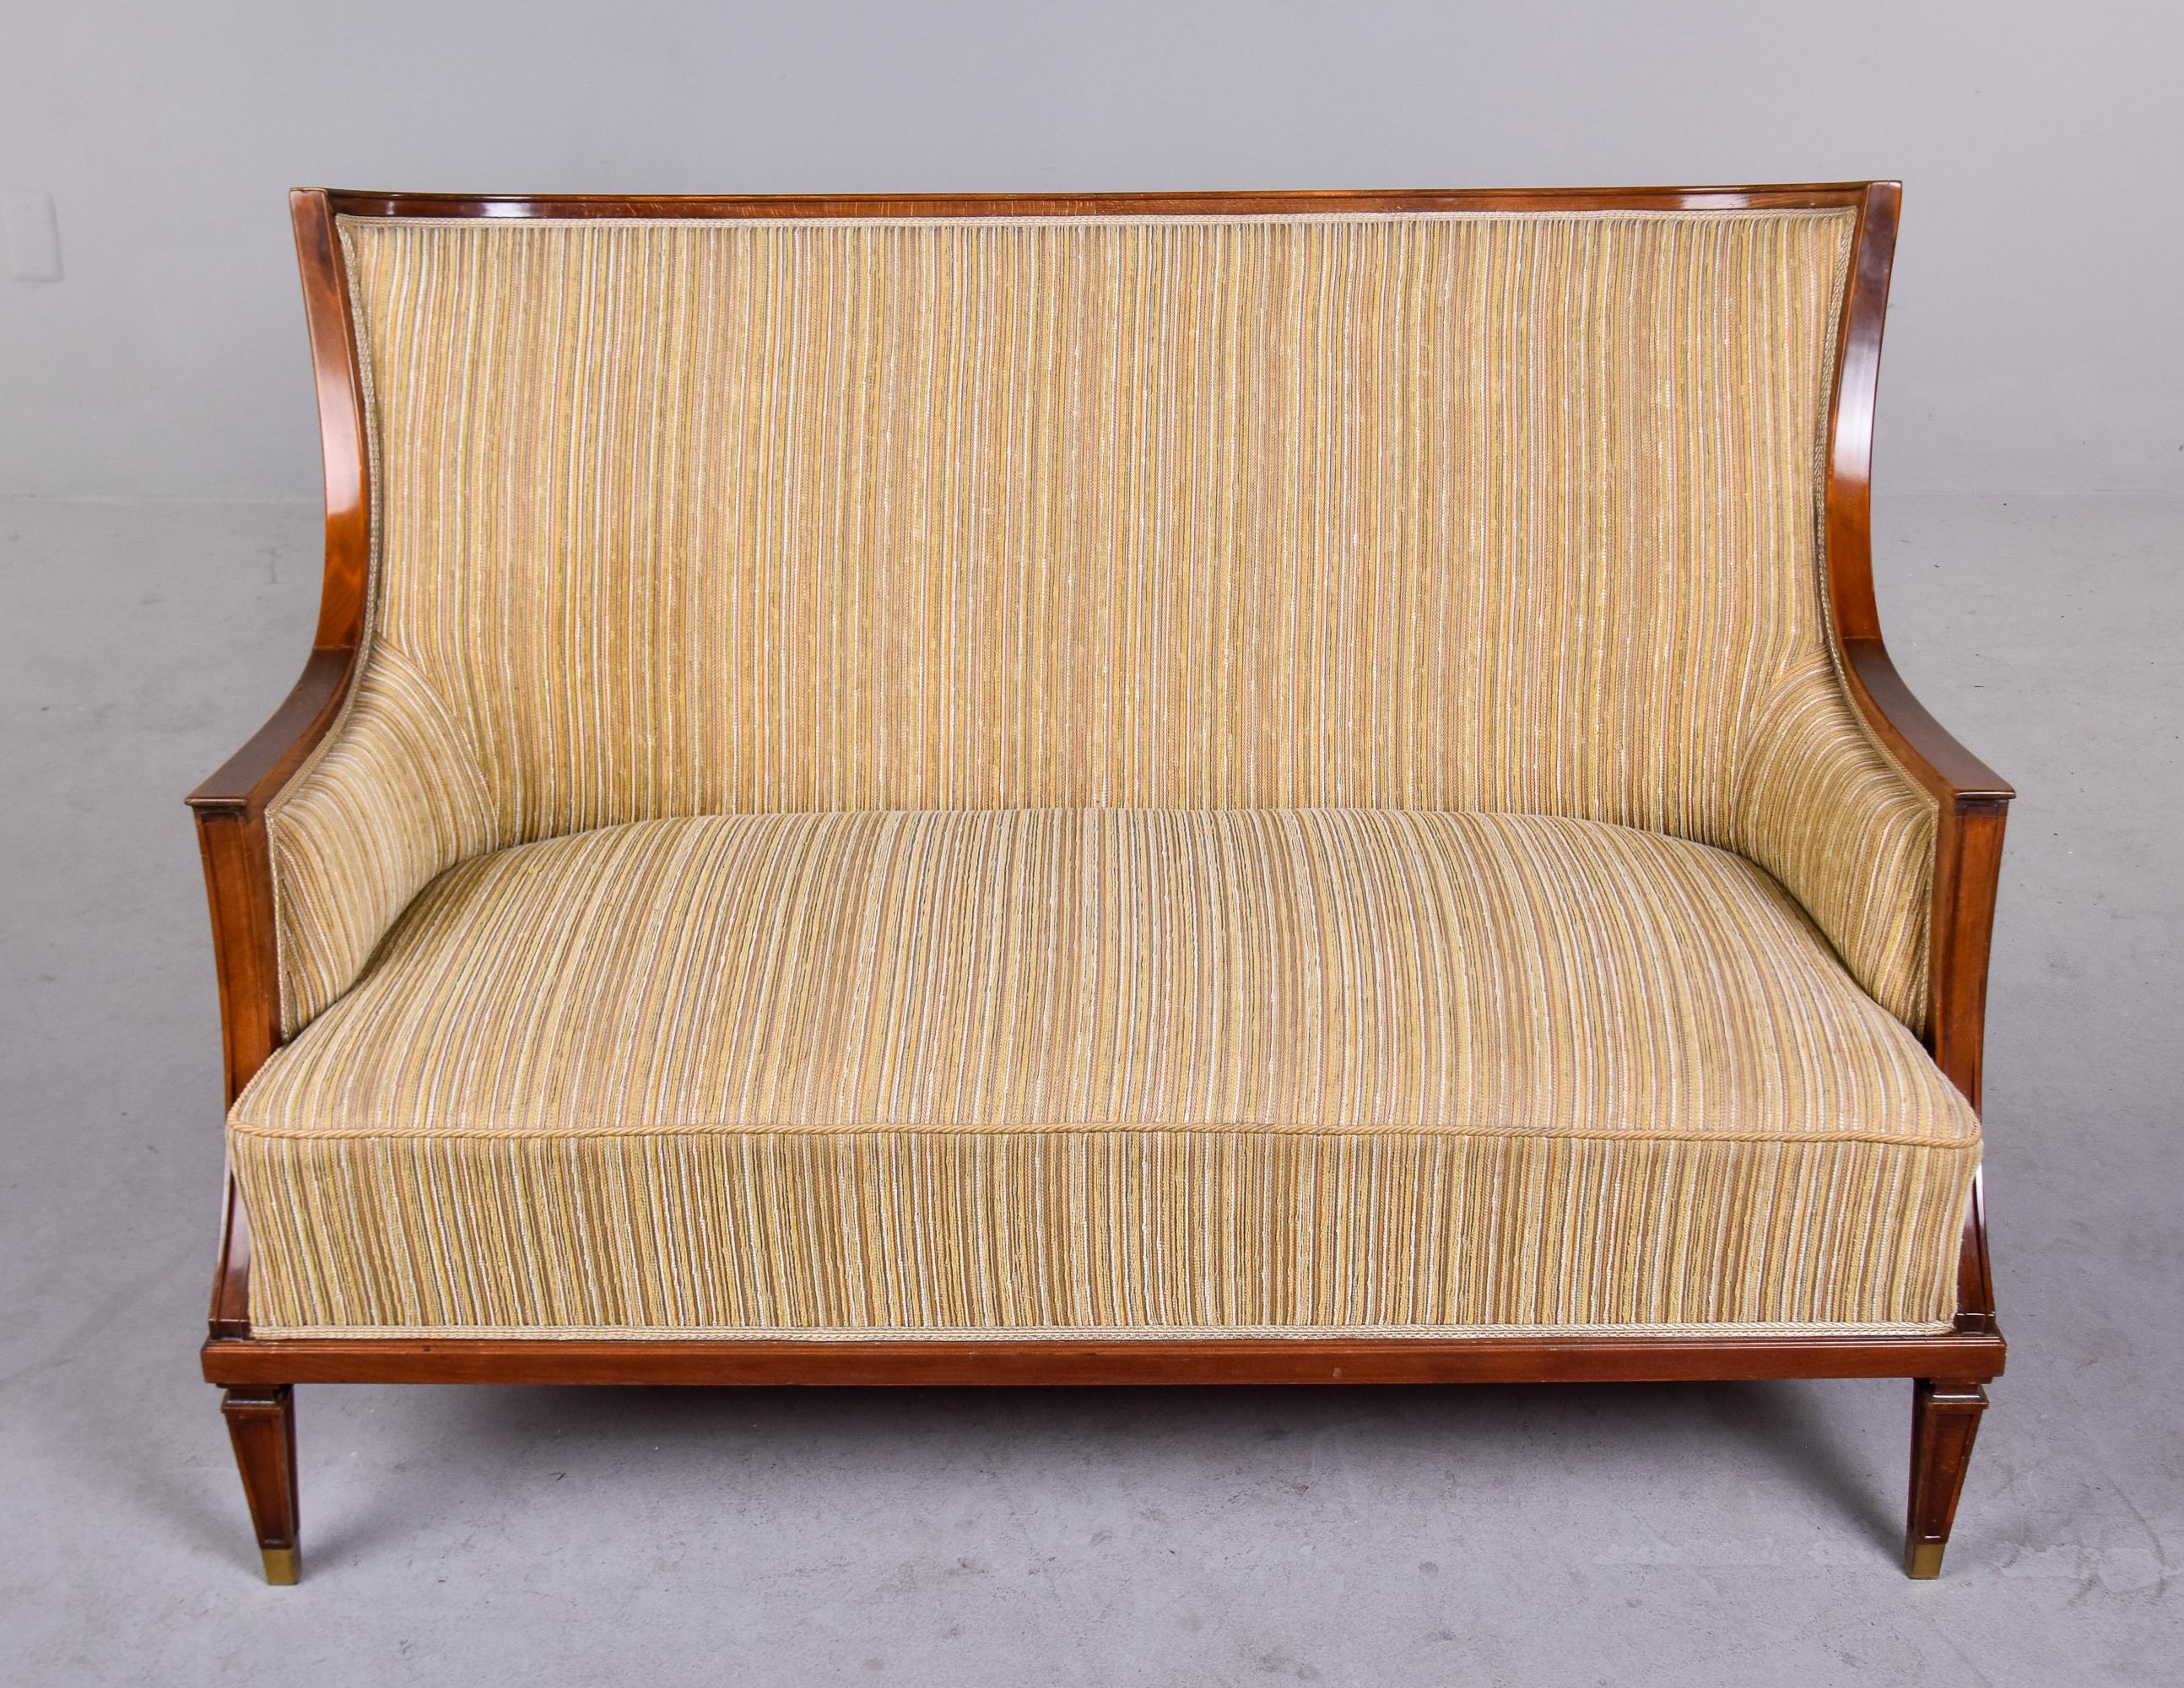 Early 20th Century Swedish Settee or Sofa In Good Condition For Sale In Troy, MI